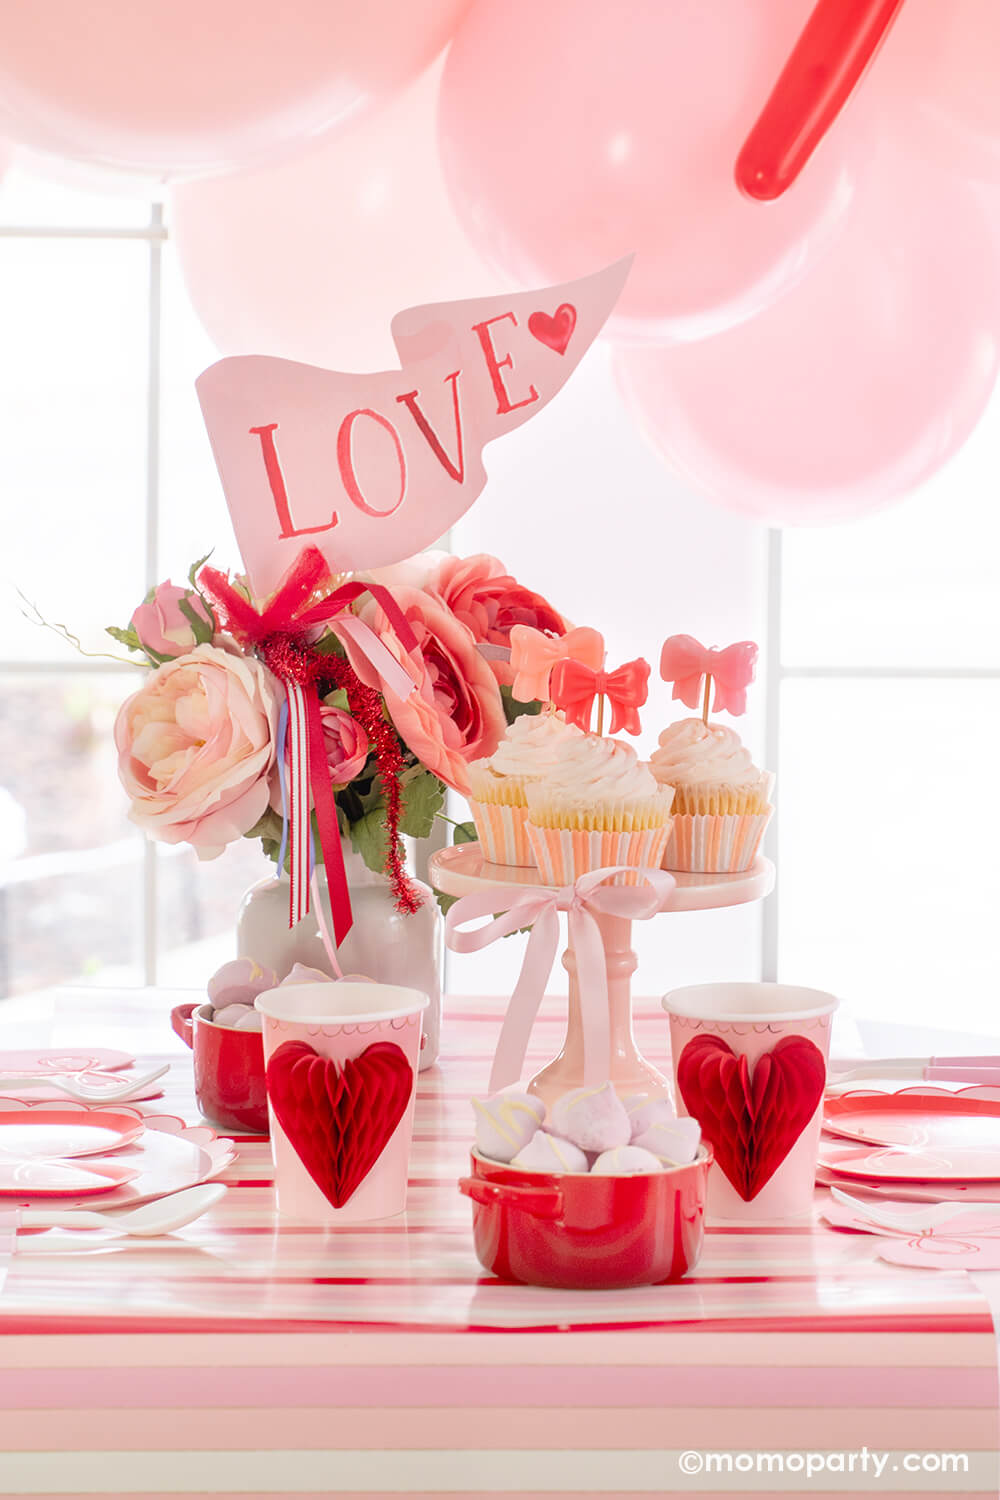 Momo Party presents A Bow-Themed Valentine's Day Party Set up. This Bow-tastic Table Setting is filled with heartwarming details, featuring Meri Meri Heart Pattern Dinner Plates layered with Bow Plates and matching napkins, Honeycomb Heart Cups, Pink Bow Candles atop cupcakes, and a Love Party Pennant adorning the flower vase, all elegantly arranged on the red-striped paper runner. It's a modern and cute idea to elevate your Valentine's celebration or Galentine's Day with your besties. 